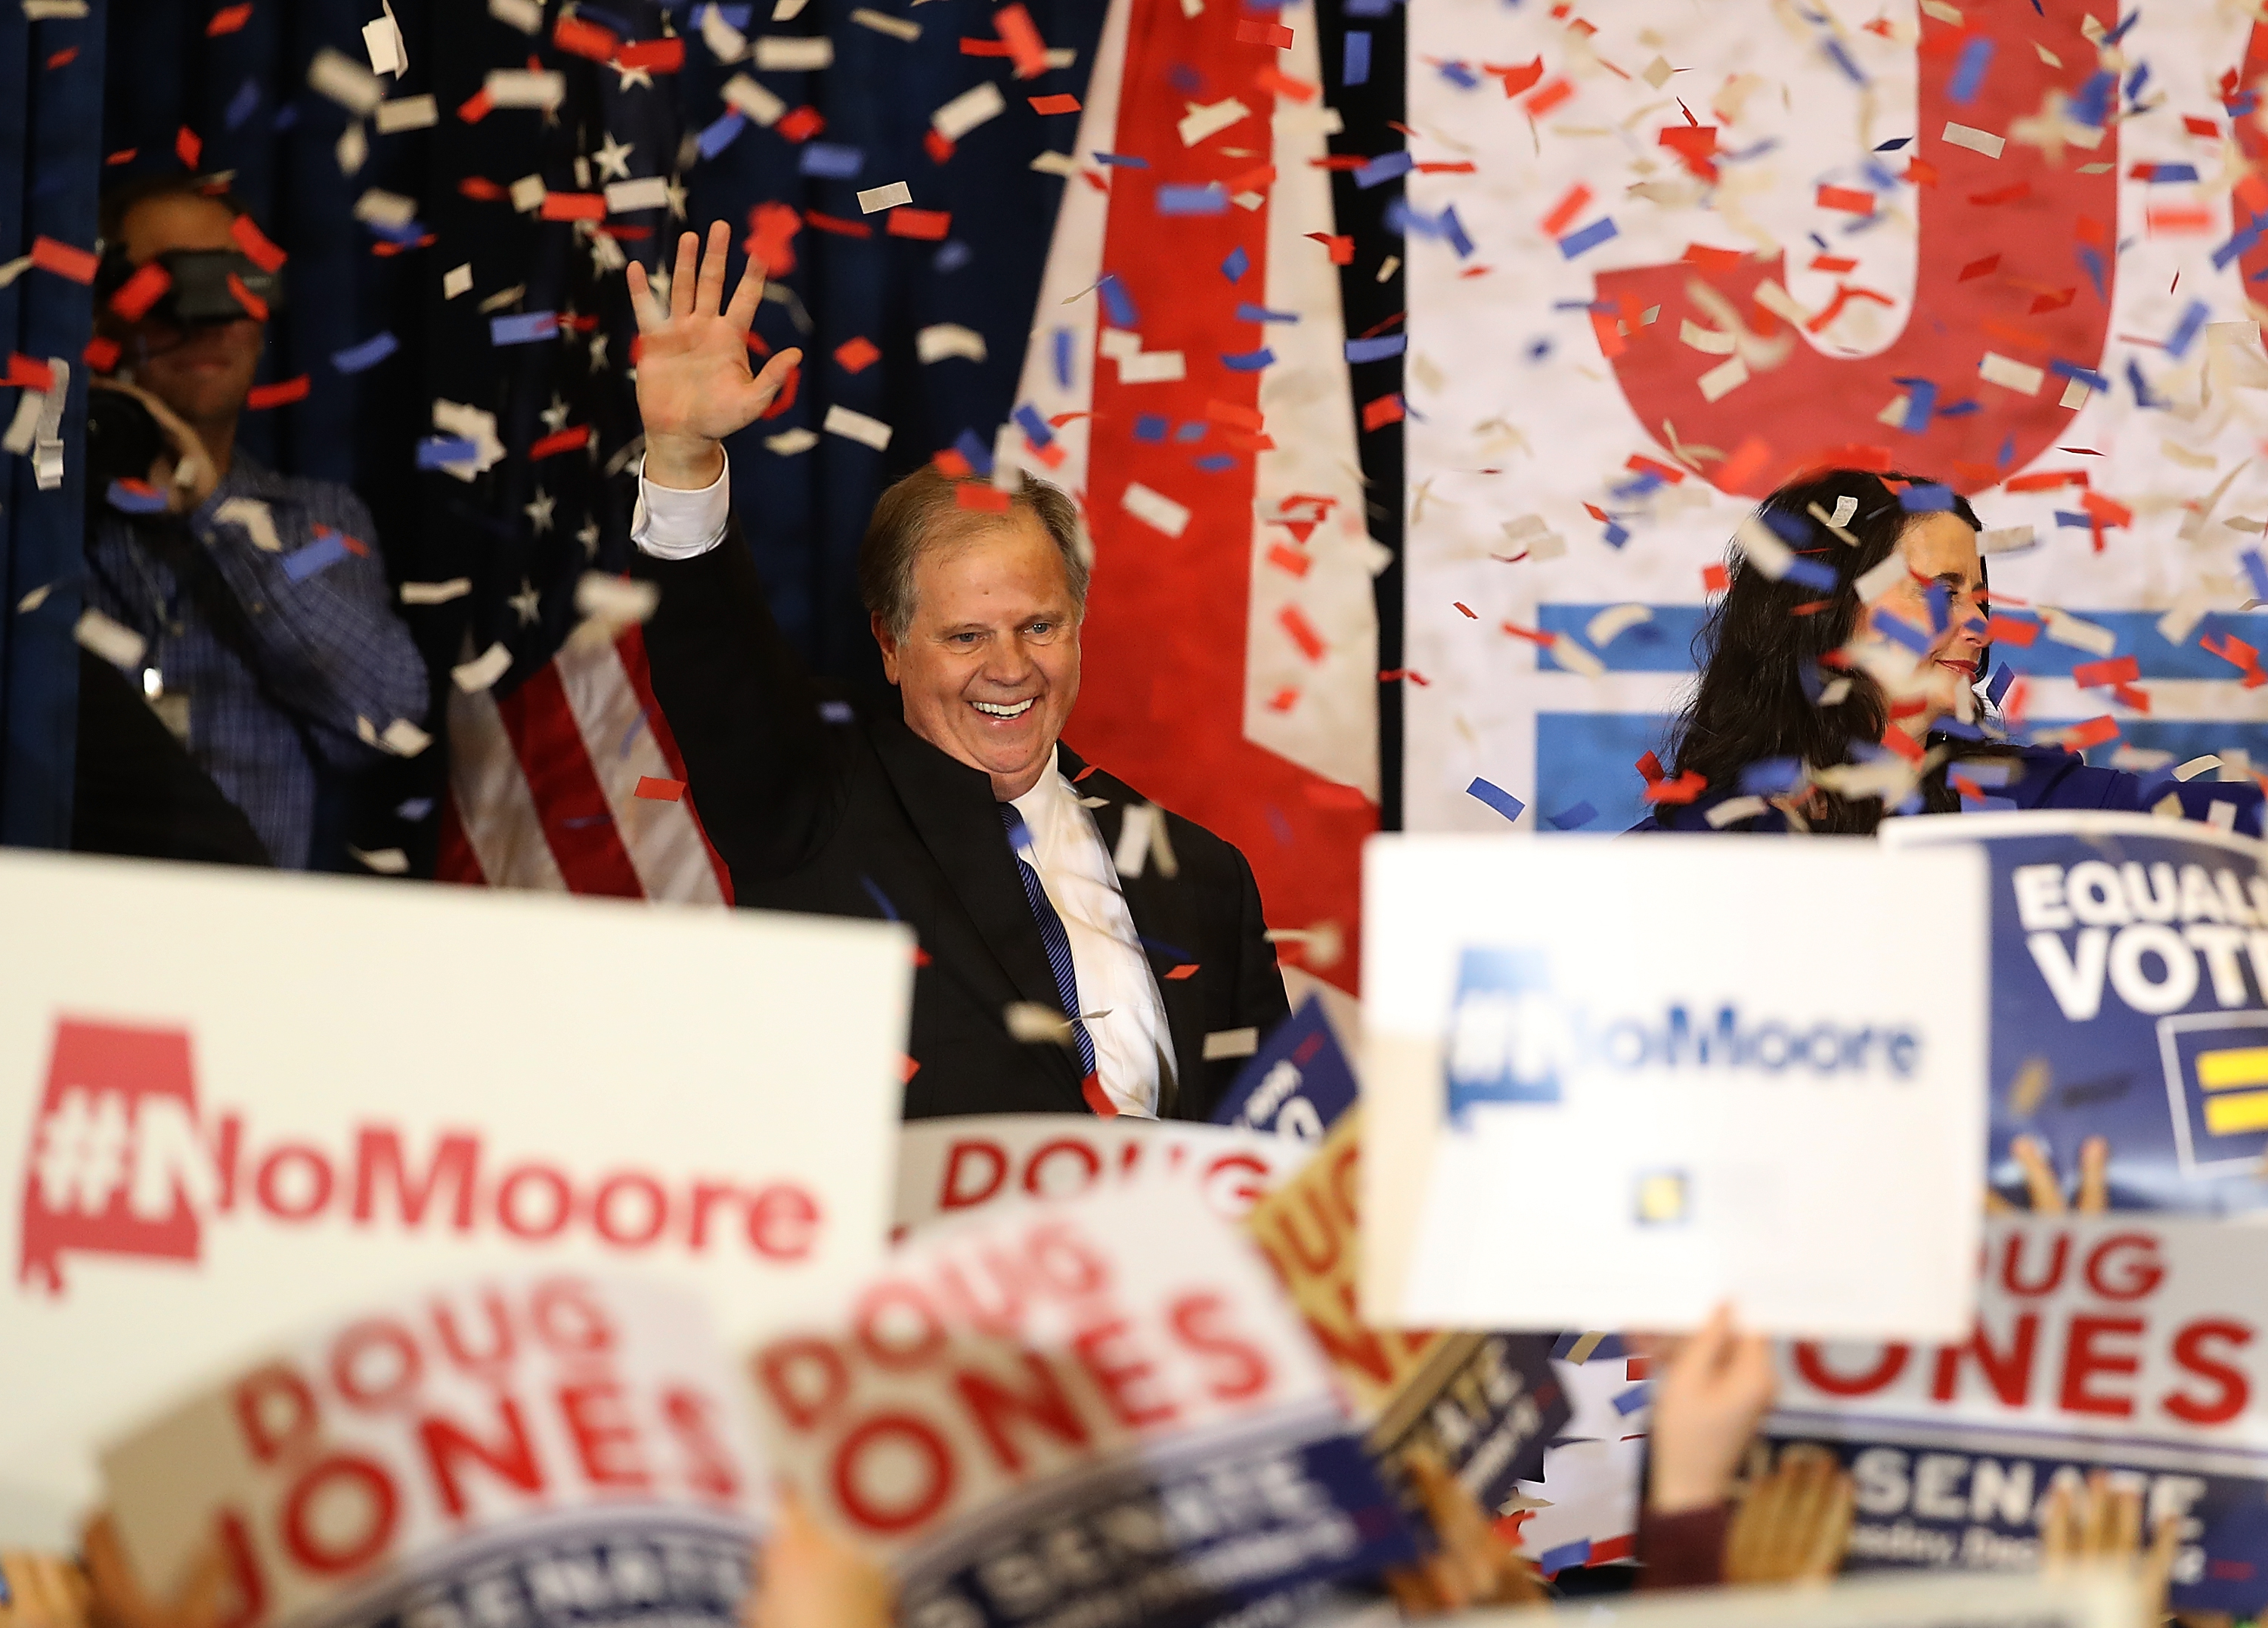 Doug Jones waves to a crowd of supporters